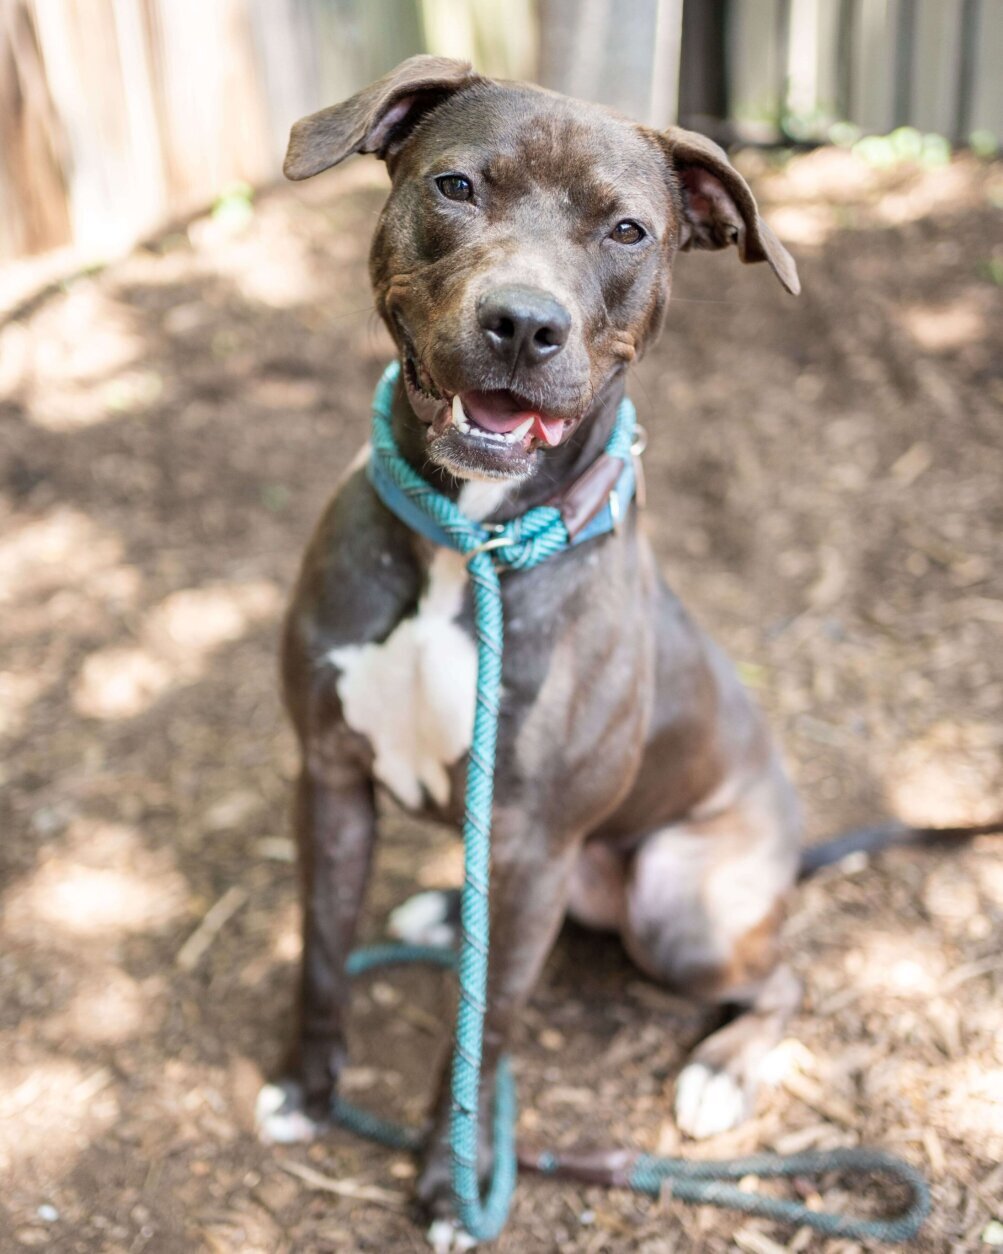 <p>Meet Diamond!</p>
<p>This affectionate 11-month-old is ready to bring happiness and adventure into your life. A true extrovert, Diamond craves the company of her favorite people and loves to meet new faces. Whether it&#8217;s a hike in the woods or snuggling up on your couch, she&#8217;ll always be your No. 1 girl!</p>
<p>Diamond is still young and is working hard on her manners, so she’s looking for a family without children. She enjoys playing with other pups and would thrive in a home with a dog who shares her outgoing and fun-loving nature.</p>
<p>If you&#8217;re searching for a devoted companion who&#8217;s full of energy and love, Diamond may be the gem for you! To learn more or to set up a meet and greet, visit <a href="https://www.humanerescuealliance.org/adopt" target="_blank" rel="noopener">humanerescuealliance.org/adopt</a>.</p>
